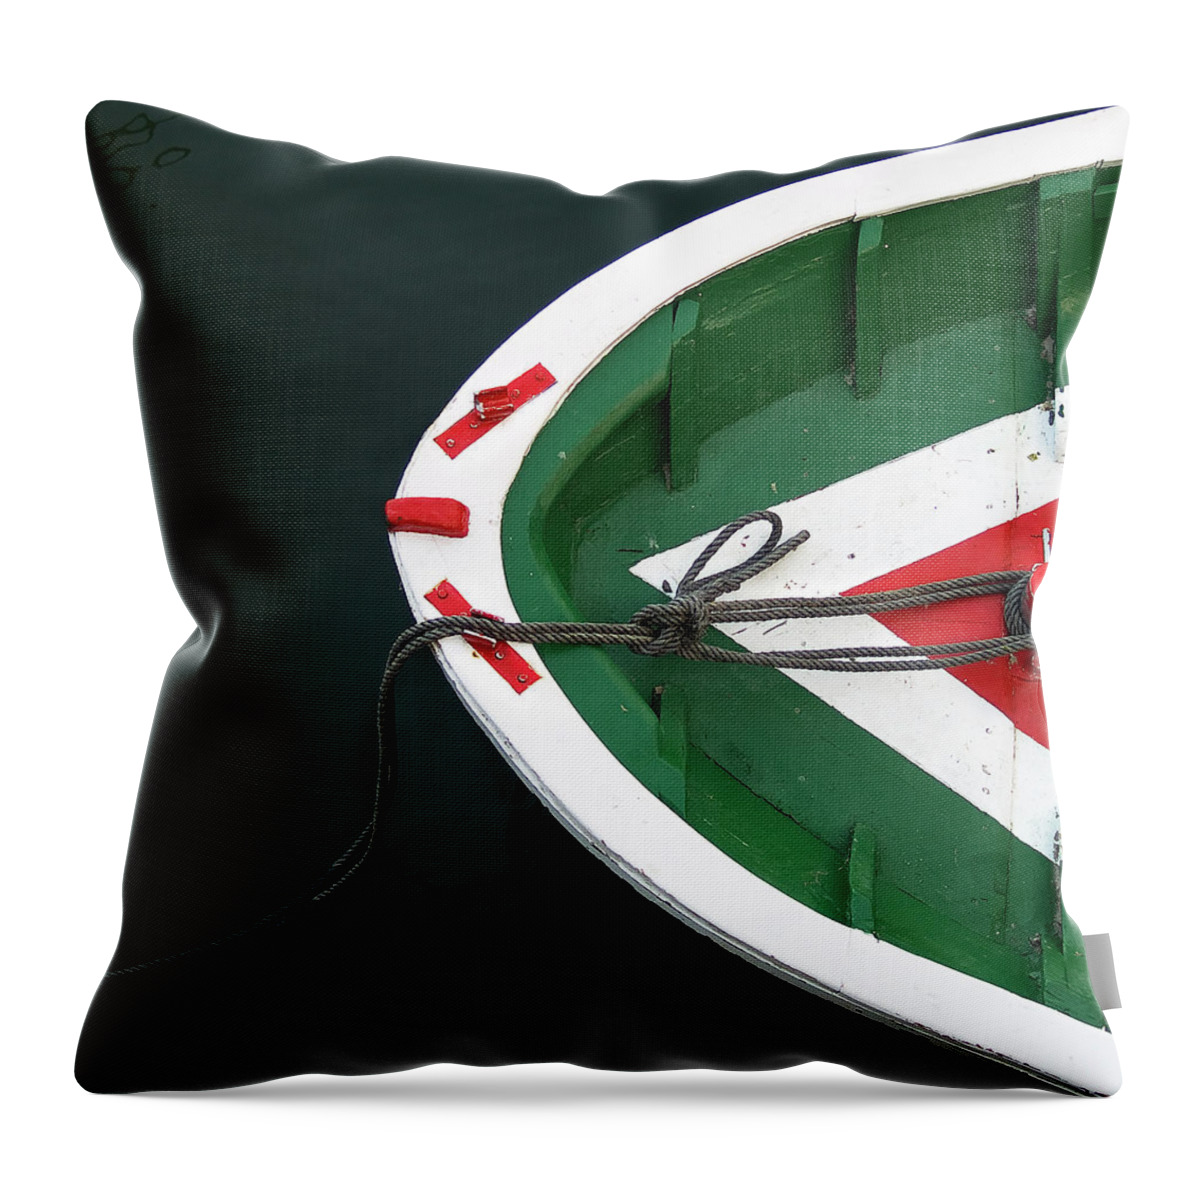 Tranquility Throw Pillow featuring the photograph Boat by Pvicens